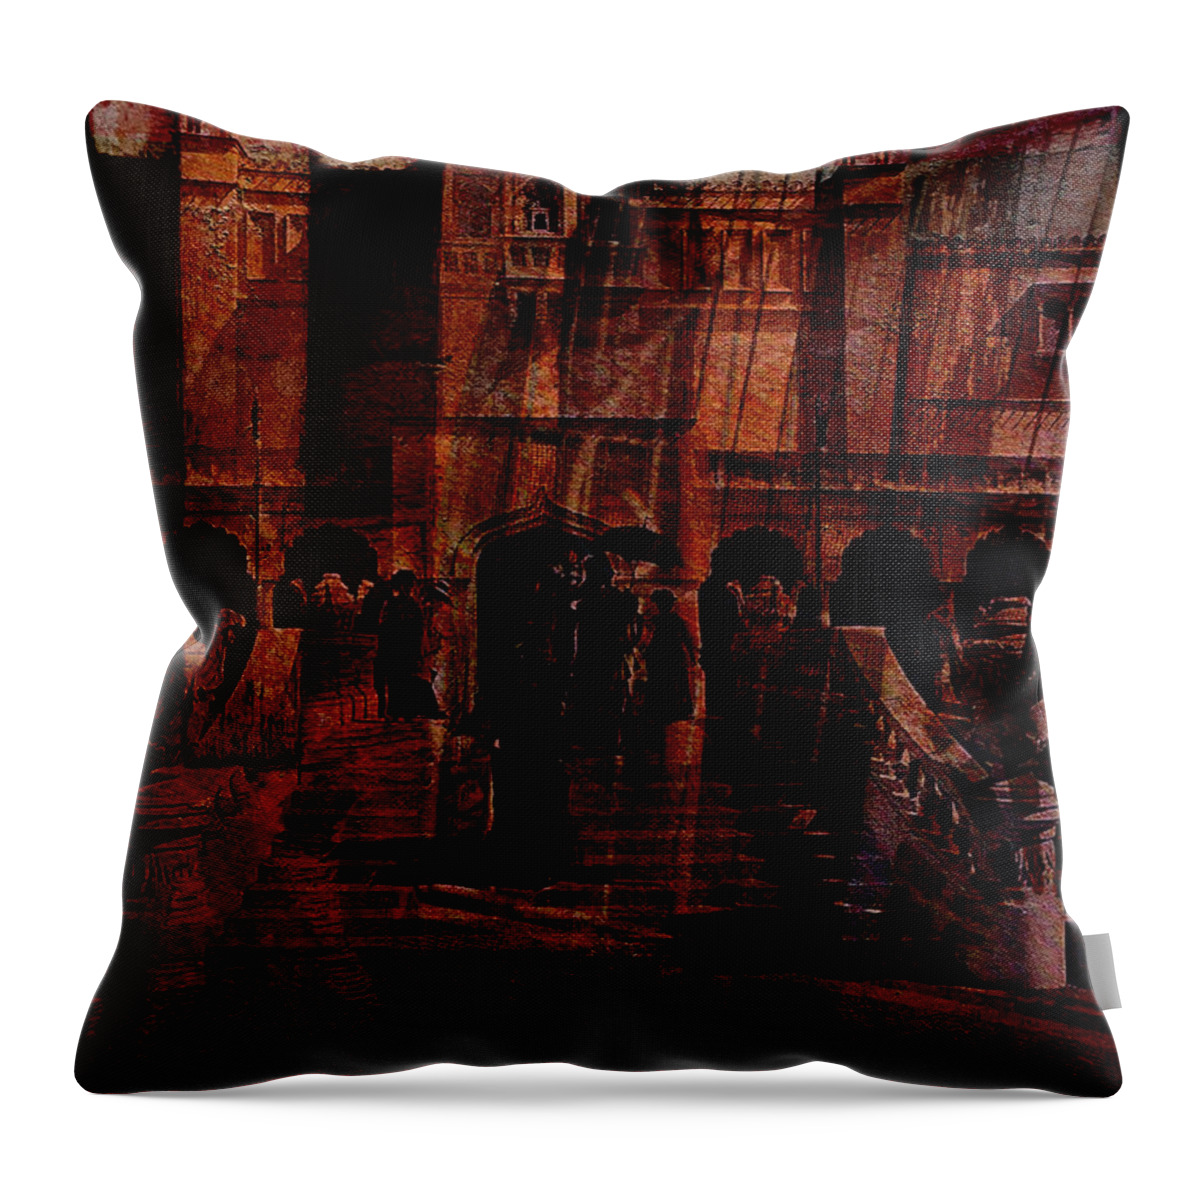 Architectural Oddity Throw Pillow featuring the digital art Architectural Oddity by Sarah Vernon